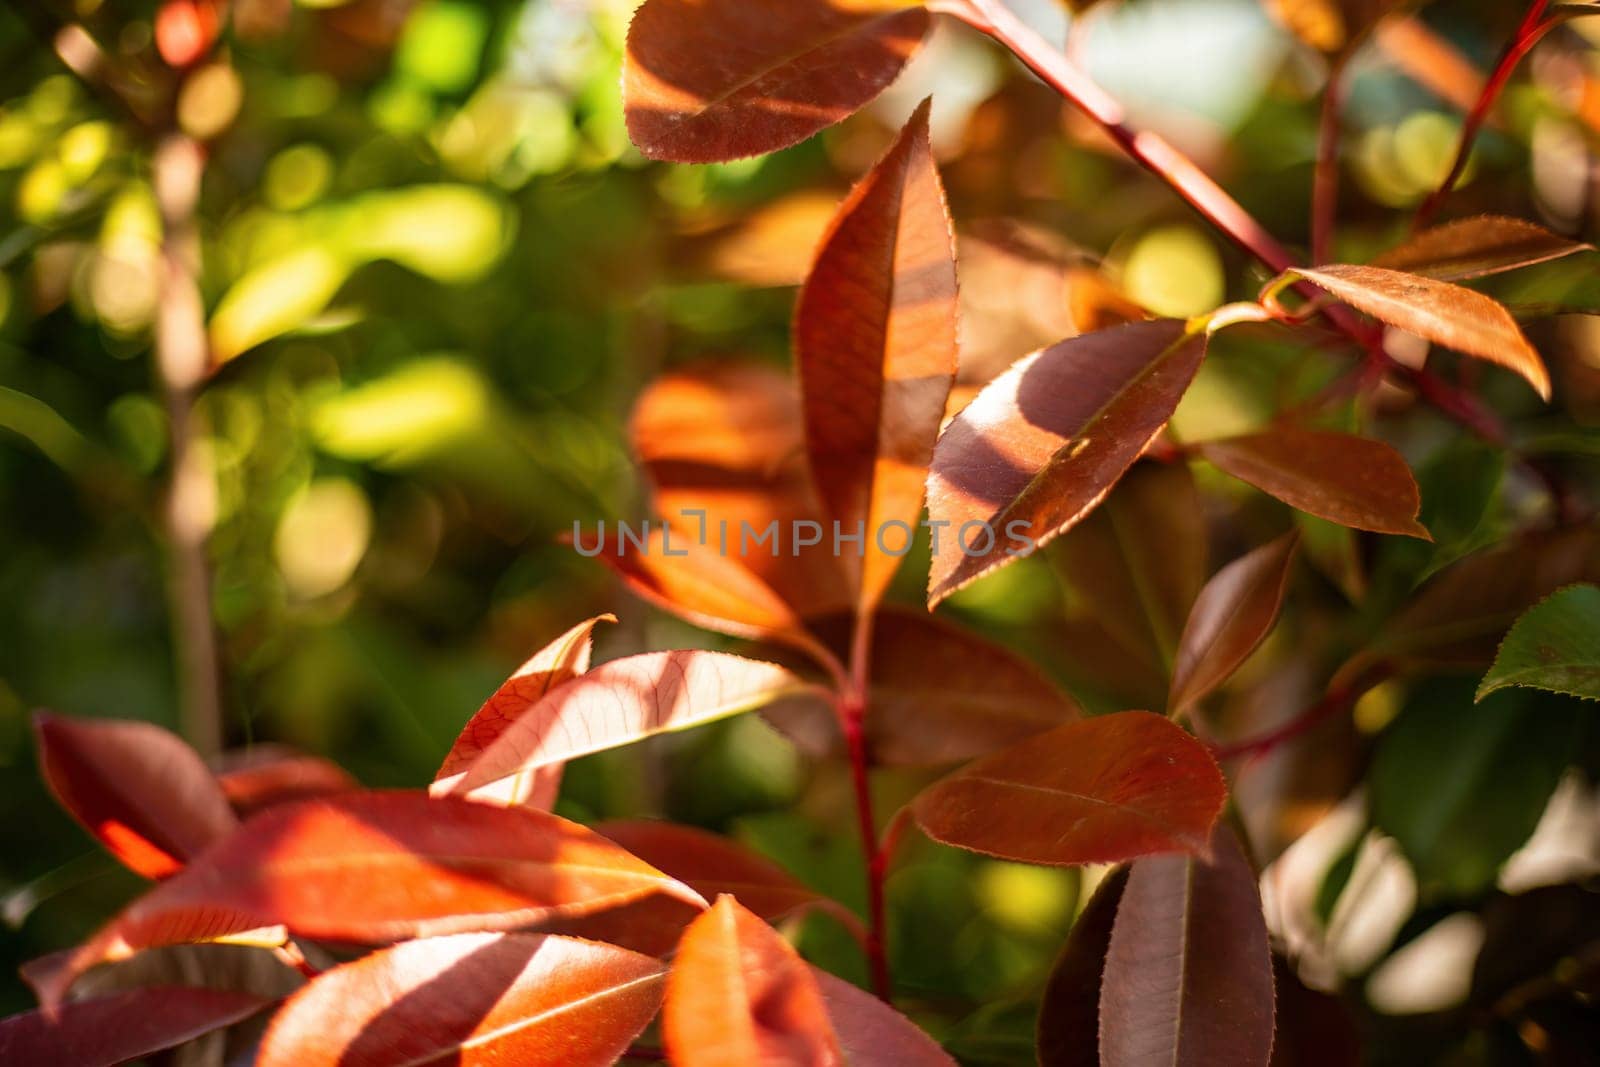 A detailed close-up of a vibrant plant with intense red leaves, displaying intricate patterns and textures under sunlight.